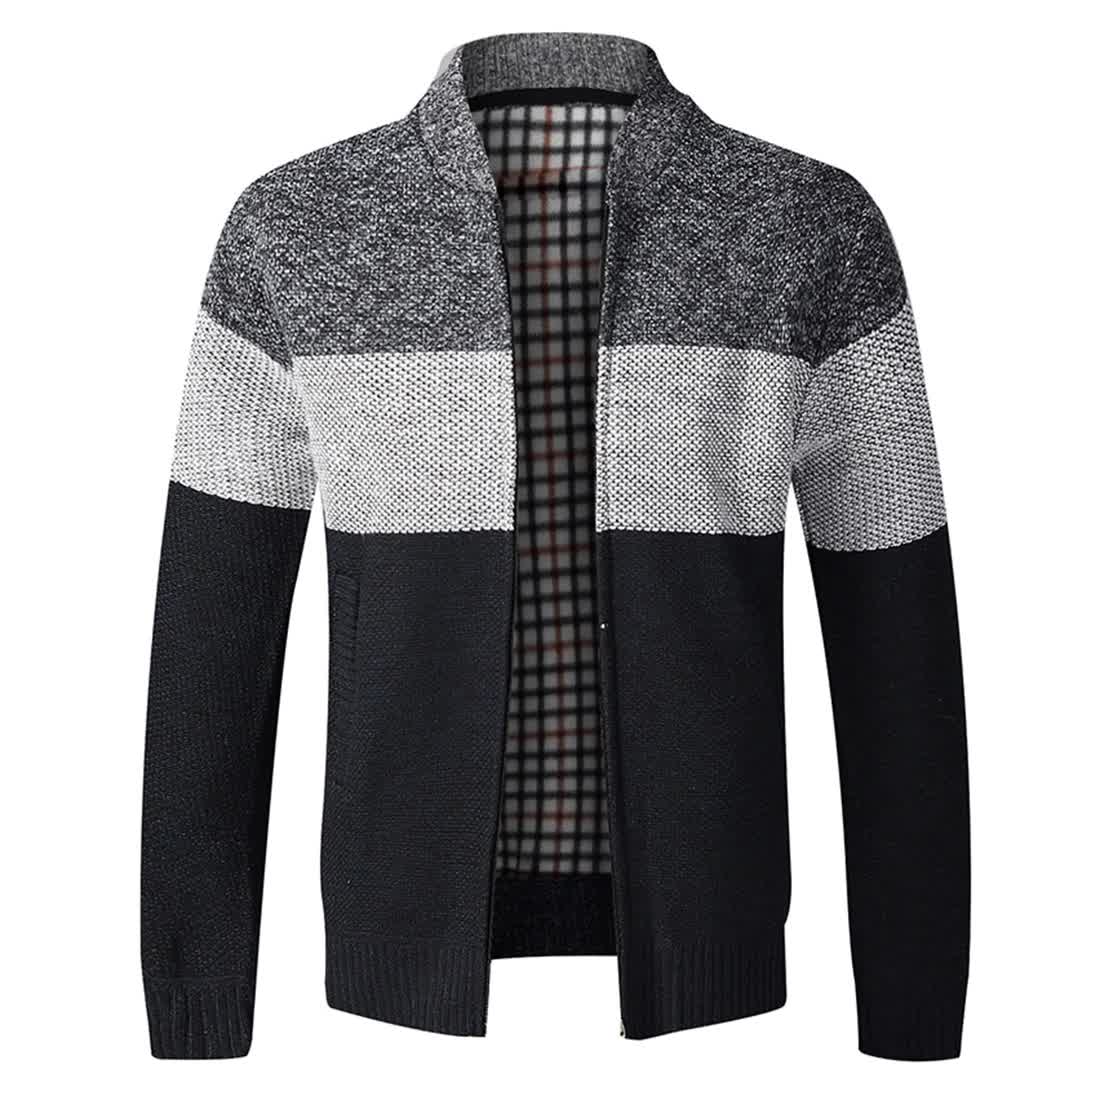 Classic Men Autumn Sweater Coat Thick Casual Sweater Cardigan Men Brand Slim Fit Knitwear Outerwear Warm Knitted Sweater Jacket